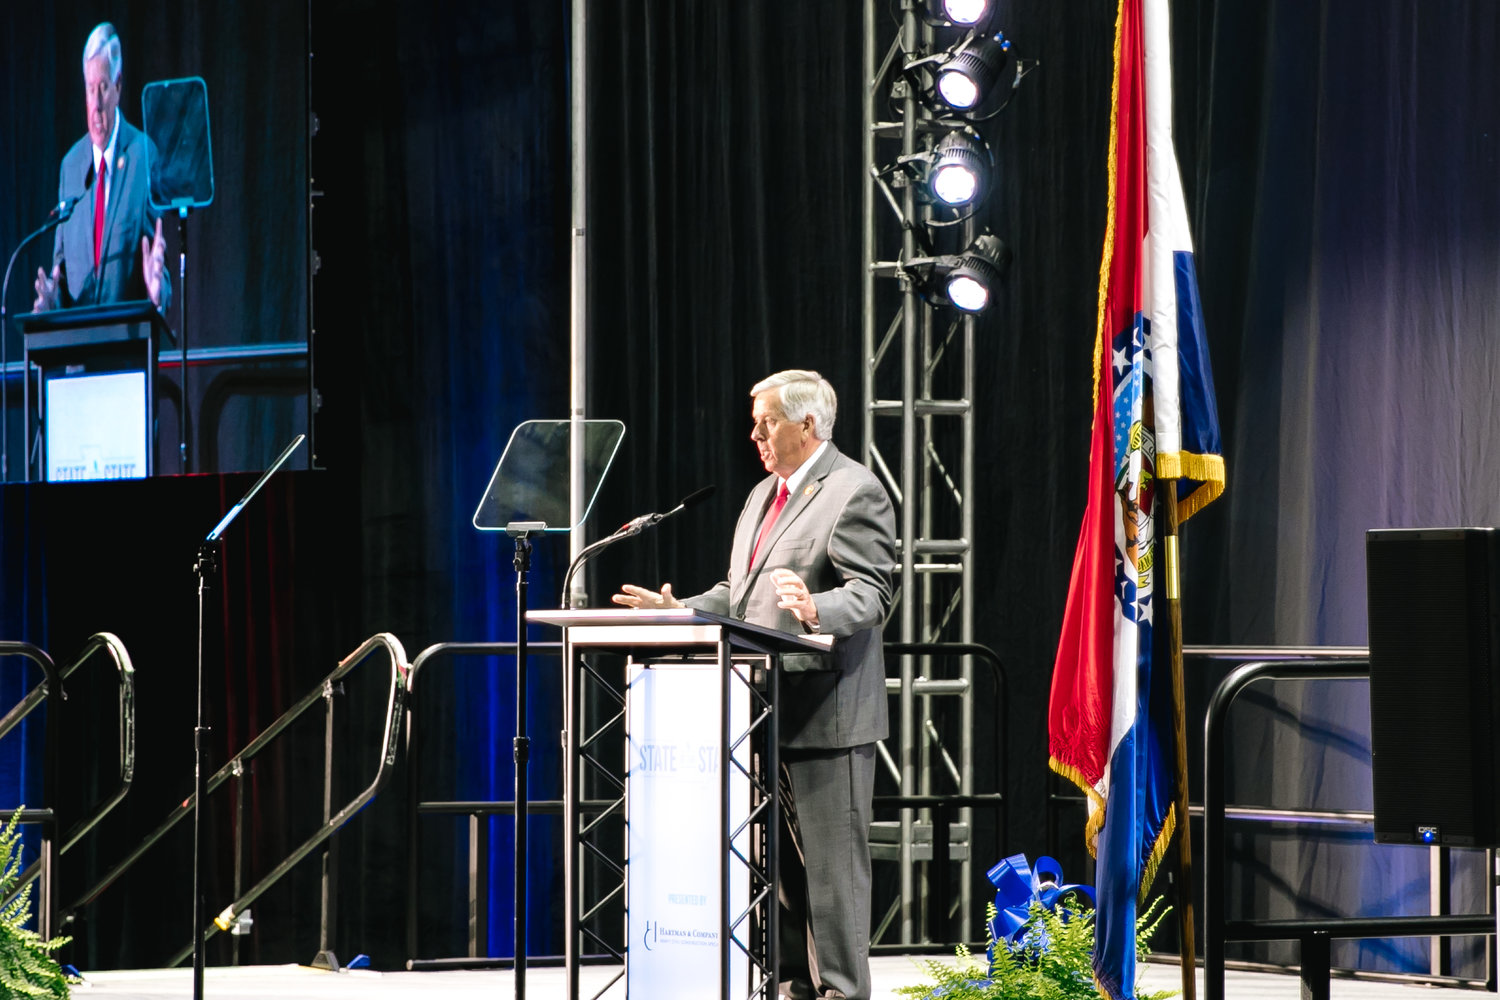 Speaking at the State of the State event at JQH Arena, Gov. Mike Parson says thousands of jobs are being created statewide through business investments.